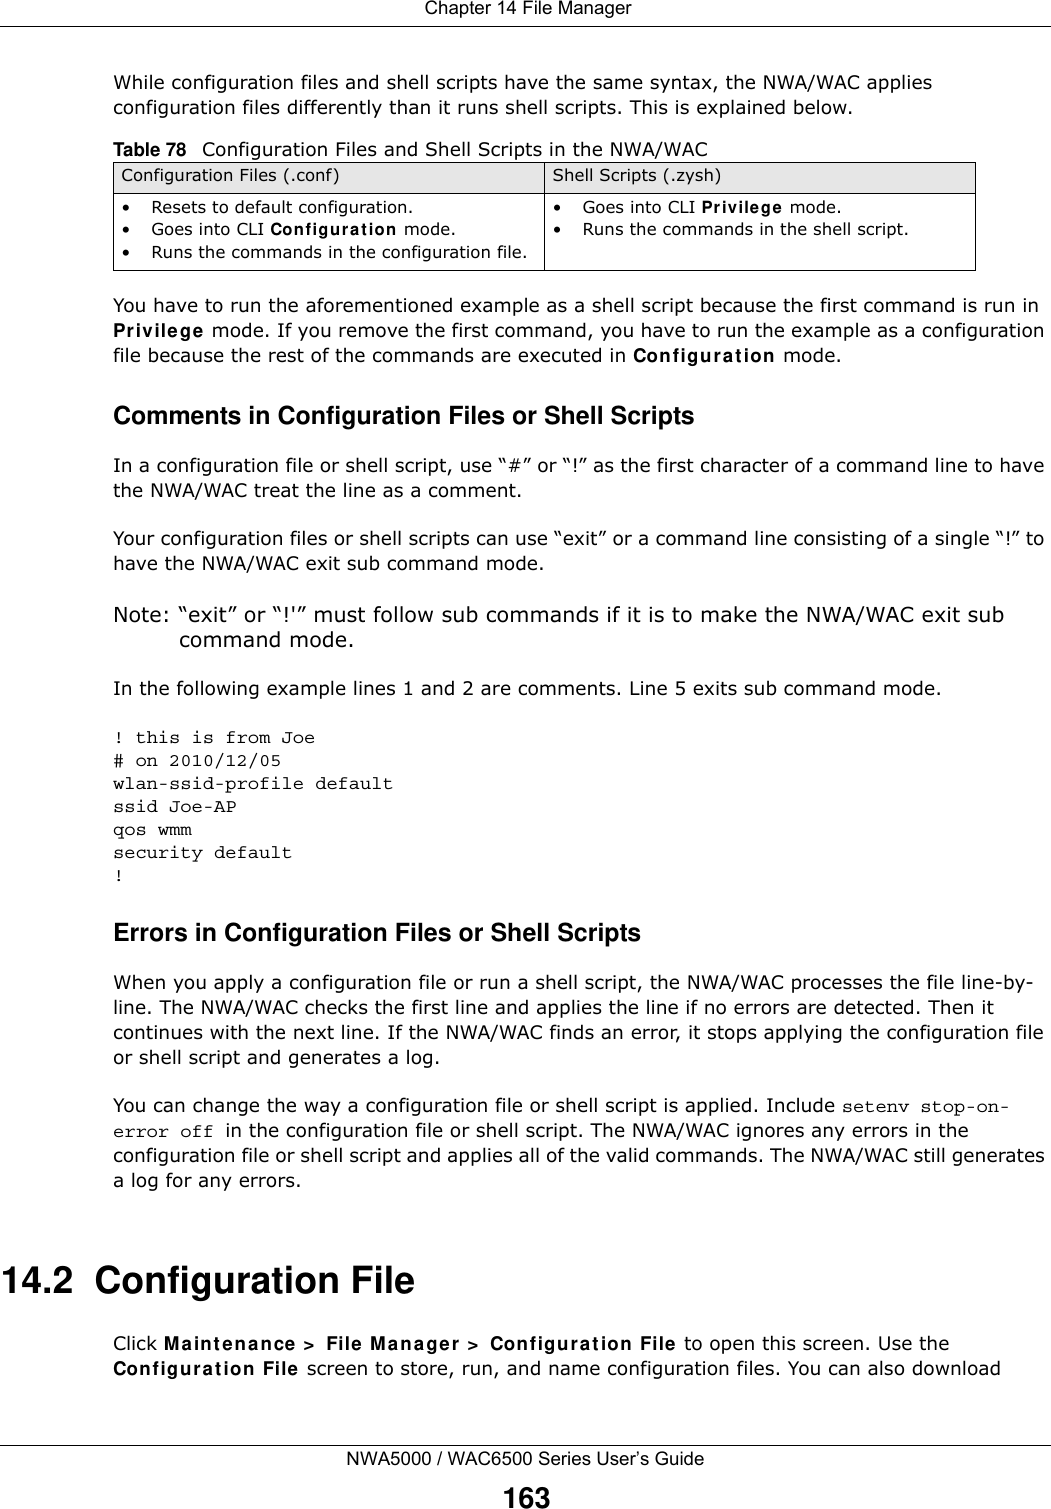  Chapter 14 File ManagerNWA5000 / WAC6500 Series User’s Guide163While configuration files and shell scripts have the same syntax, the NWA/WAC applies configuration files differently than it runs shell scripts. This is explained below.You have to run the aforementioned example as a shell script because the first command is run in Pr iv ilege mode. If you remove the first command, you have to run the example as a configuration file because the rest of the commands are executed in Con fig ura t ion mode.Comments in Configuration Files or Shell ScriptsIn a configuration file or shell script, use “#” or “!” as the first character of a command line to have the NWA/WAC treat the line as a comment. Your configuration files or shell scripts can use “exit” or a command line consisting of a single “!” to have the NWA/WAC exit sub command mode.Note: “exit” or “!&apos;” must follow sub commands if it is to make the NWA/WAC exit sub command mode.In the following example lines 1 and 2 are comments. Line 5 exits sub command mode. ! this is from Joe# on 2010/12/05wlan-ssid-profile defaultssid Joe-APqos wmmsecurity default!Errors in Configuration Files or Shell ScriptsWhen you apply a configuration file or run a shell script, the NWA/WAC processes the file line-by-line. The NWA/WAC checks the first line and applies the line if no errors are detected. Then it continues with the next line. If the NWA/WAC finds an error, it stops applying the configuration file or shell script and generates a log. You can change the way a configuration file or shell script is applied. Include setenv stop-on-error off in the configuration file or shell script. The NWA/WAC ignores any errors in the configuration file or shell script and applies all of the valid commands. The NWA/WAC still generates a log for any errors. 14.2  Configuration FileClick M ainte nan ce  &gt;  File Man ager  &gt;  Configura tion  File to open this screen. Use the Configur at ion File screen to store, run, and name configuration files. You can also download Table 78   Configuration Files and Shell Scripts in the NWA/WACConfiguration Files (.conf) Shell Scripts (.zysh)• Resets to default configuration.•Goes into CLI Co nf ig ura t io n mode.• Runs the commands in the configuration file.•Goes into CLI Pr ivilege mode.• Runs the commands in the shell script.